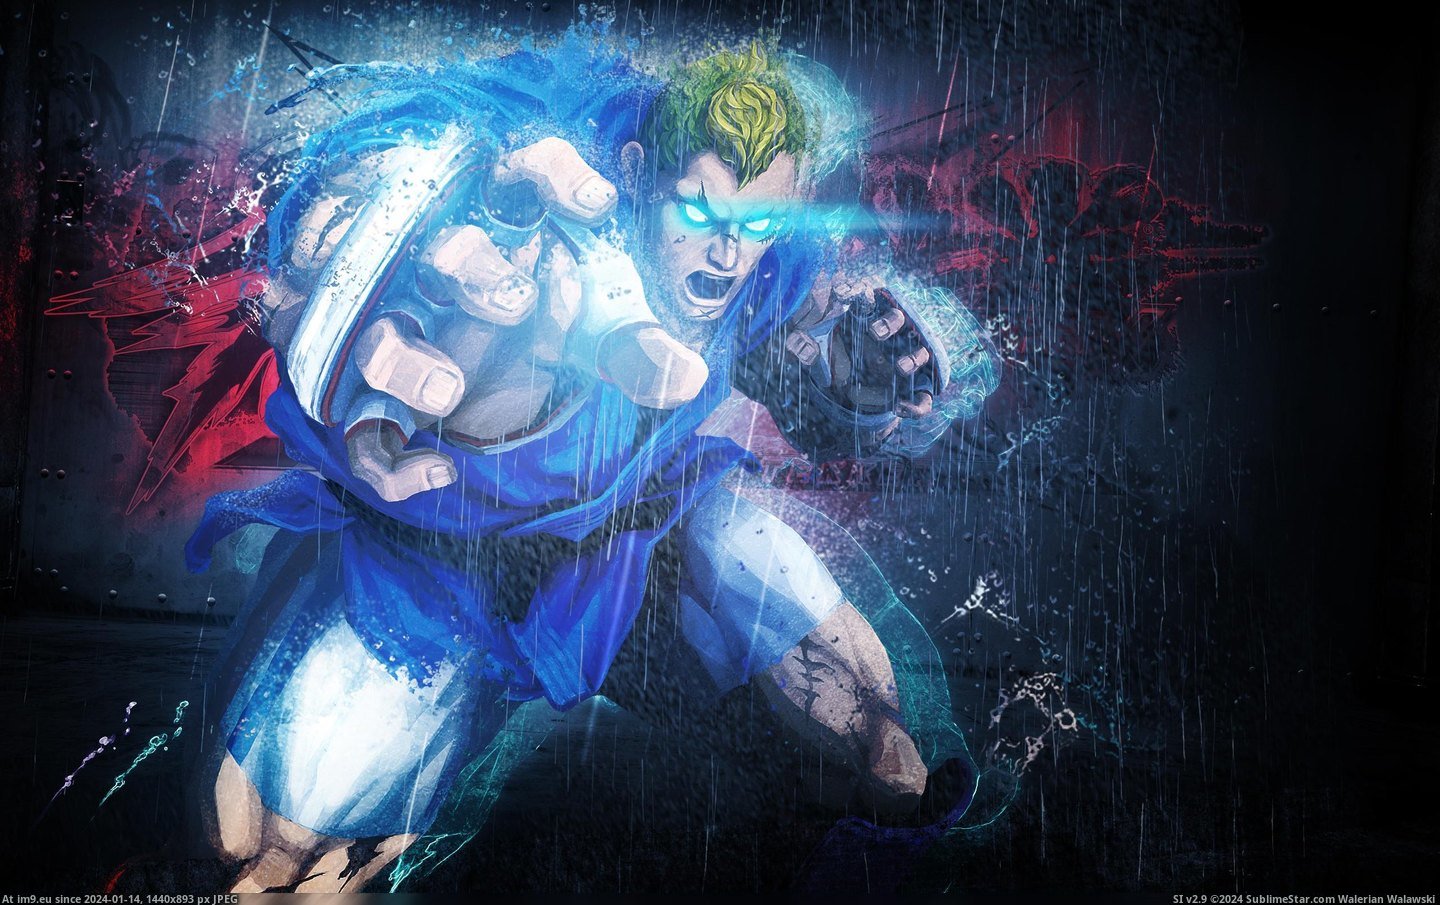 #Wallpaper #Wide #Abel #Street #Fighter Abel In The Street Fighter Wide HD Wallpaper Pic. (Obraz z album Unique HD Wallpapers))